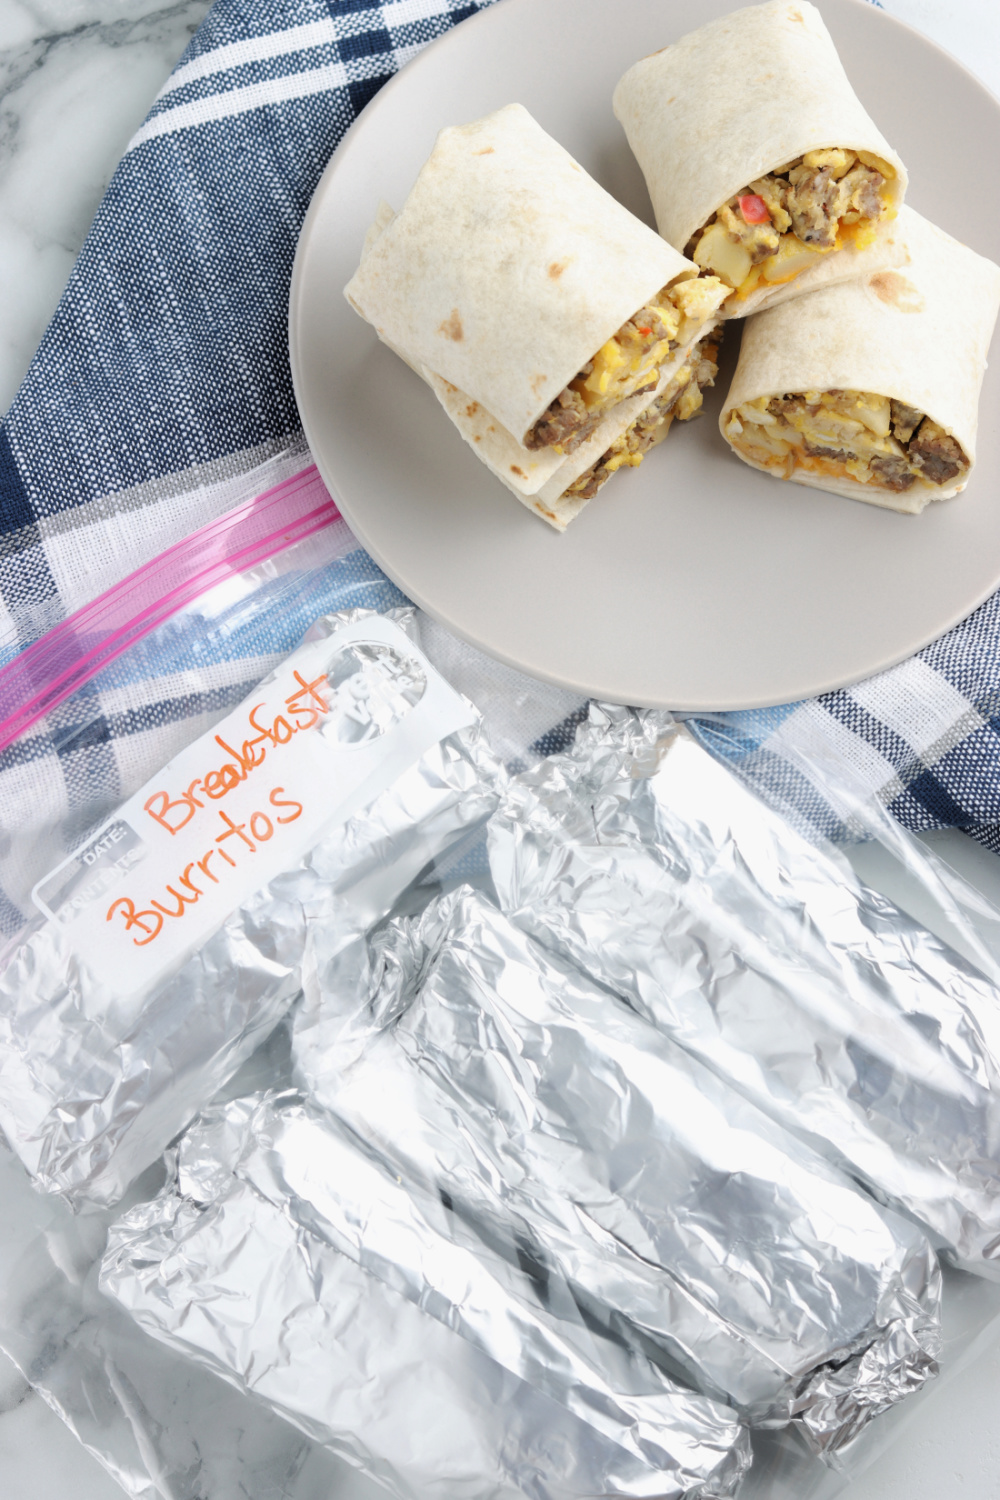 Fully Loaded Breakfast Burritos on a plate and wrapped in foil